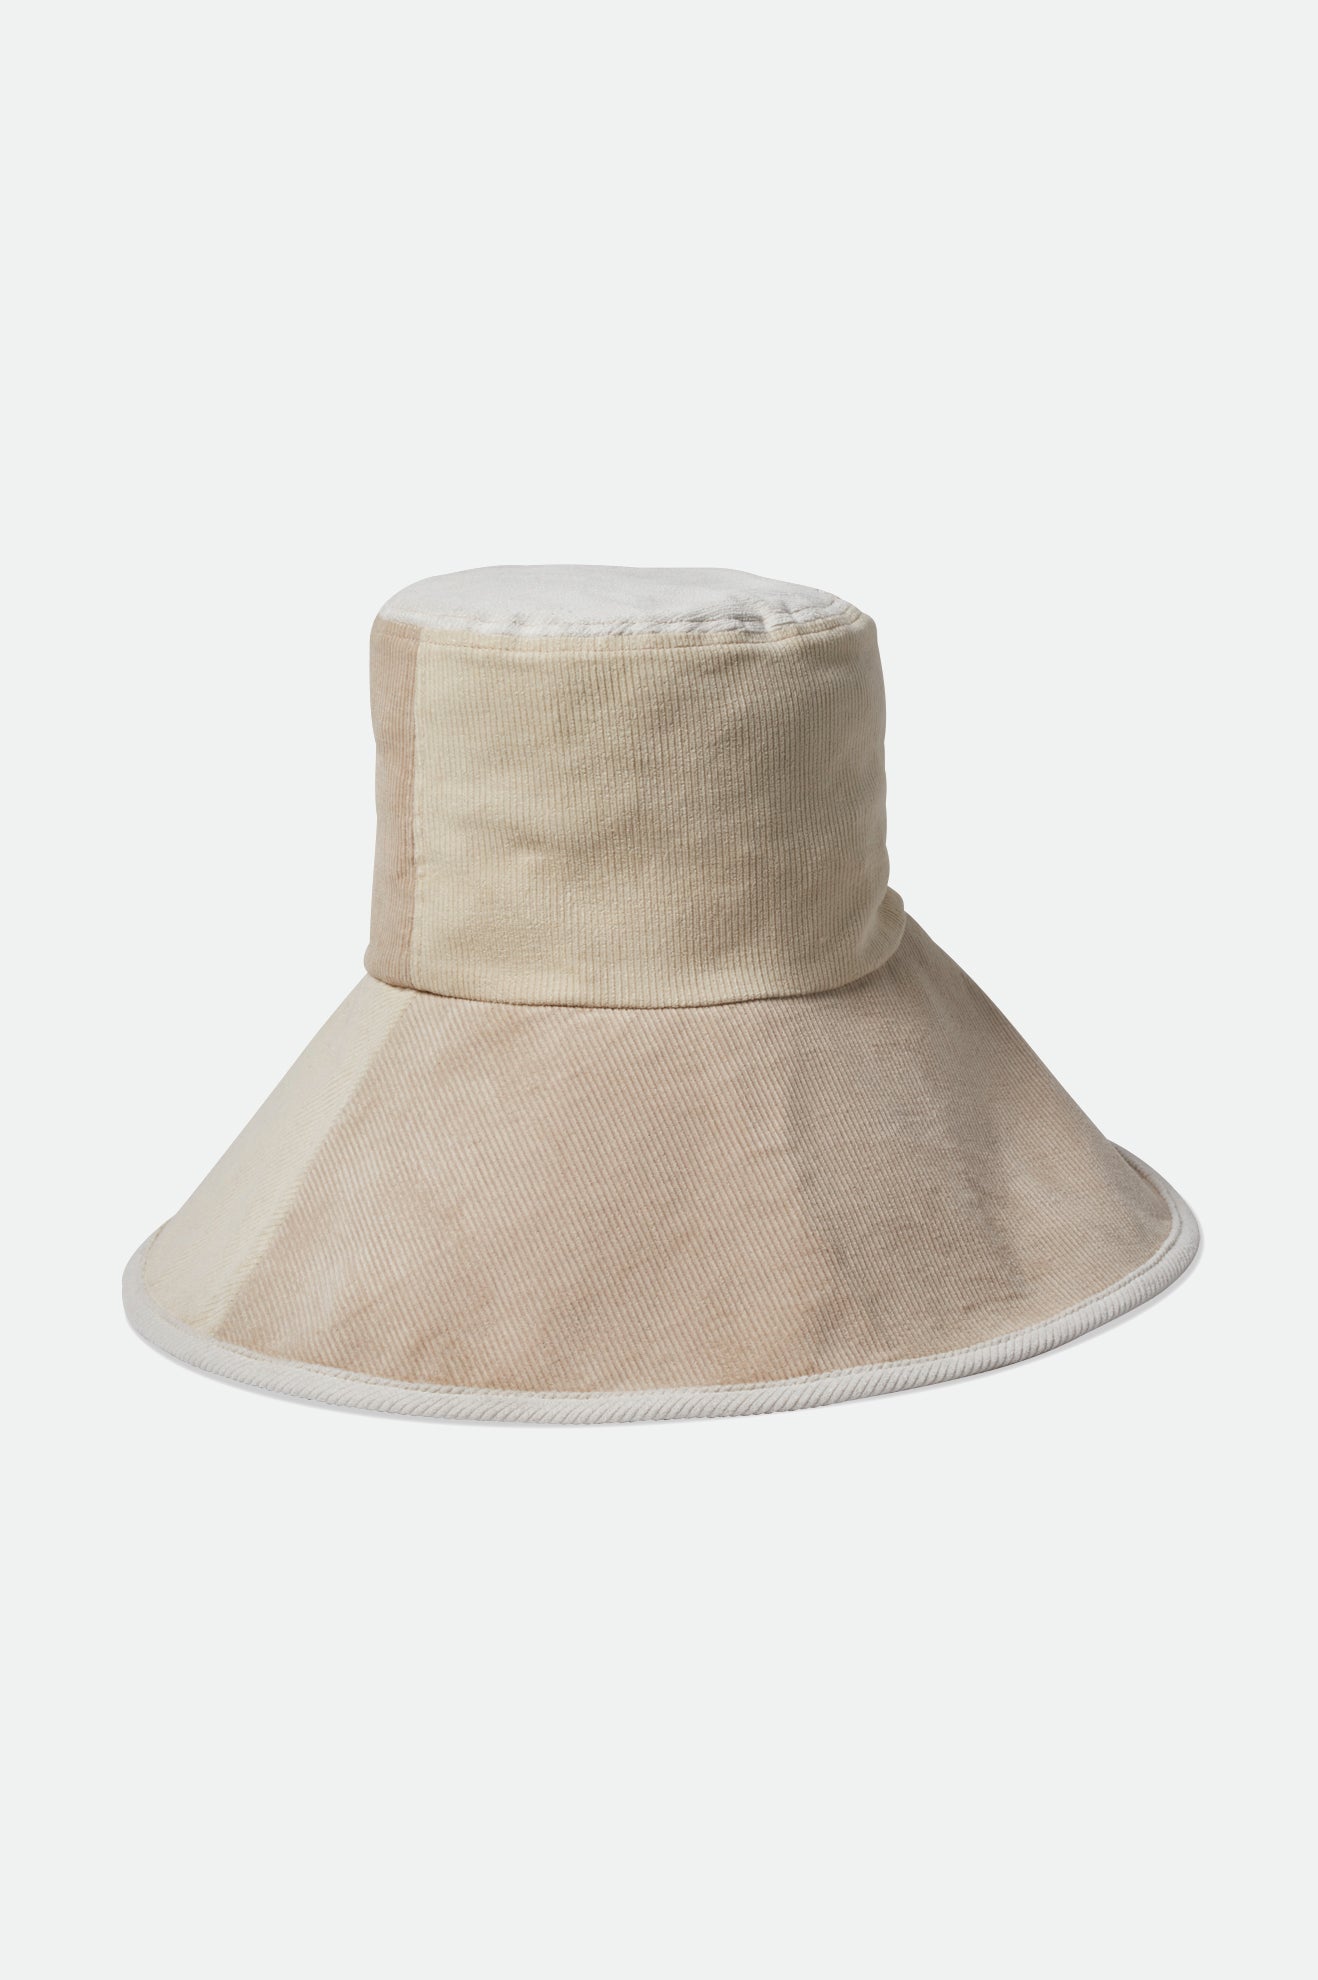 Maddie Packable Bucket Hat - Dove/Off White/White